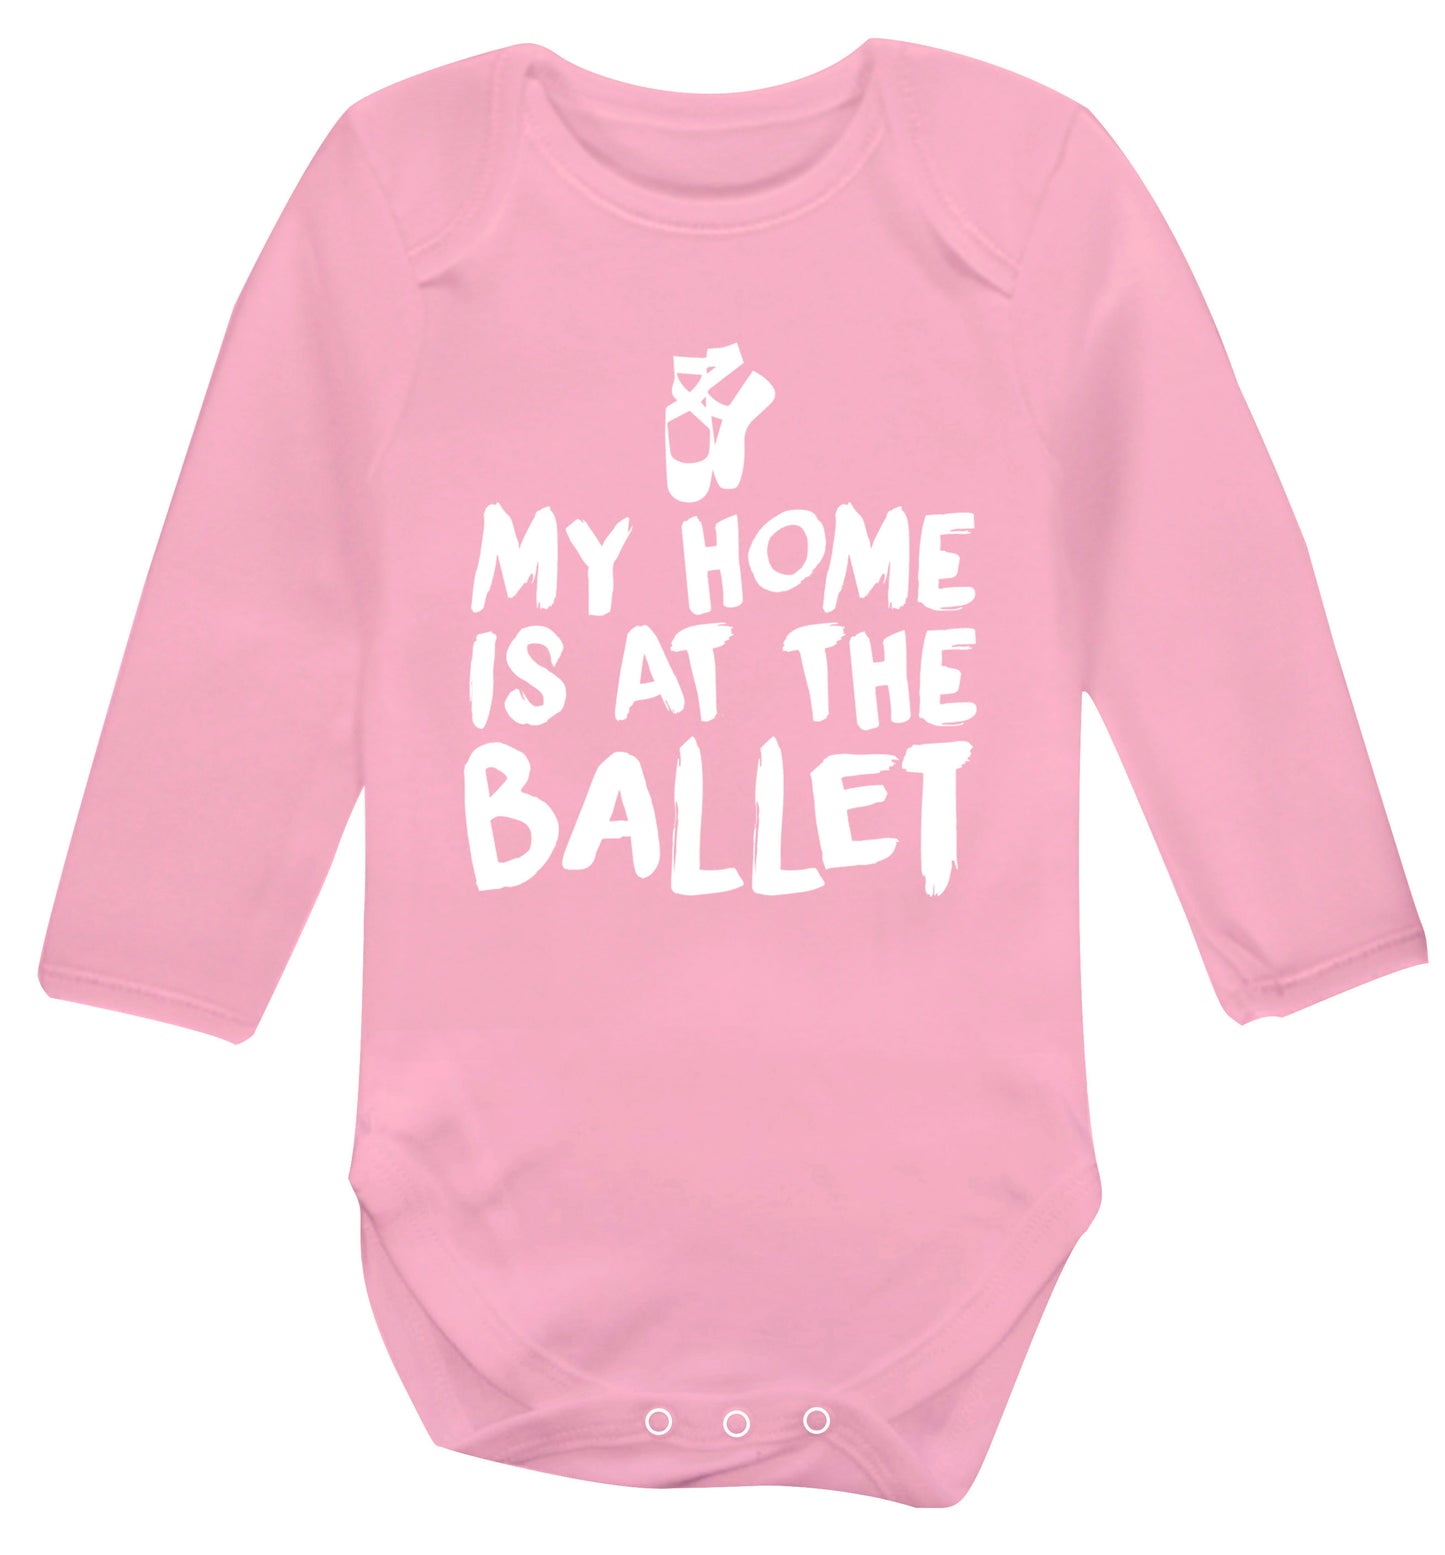 My home is at the dance studio Baby Vest long sleeved pale pink 6-12 months